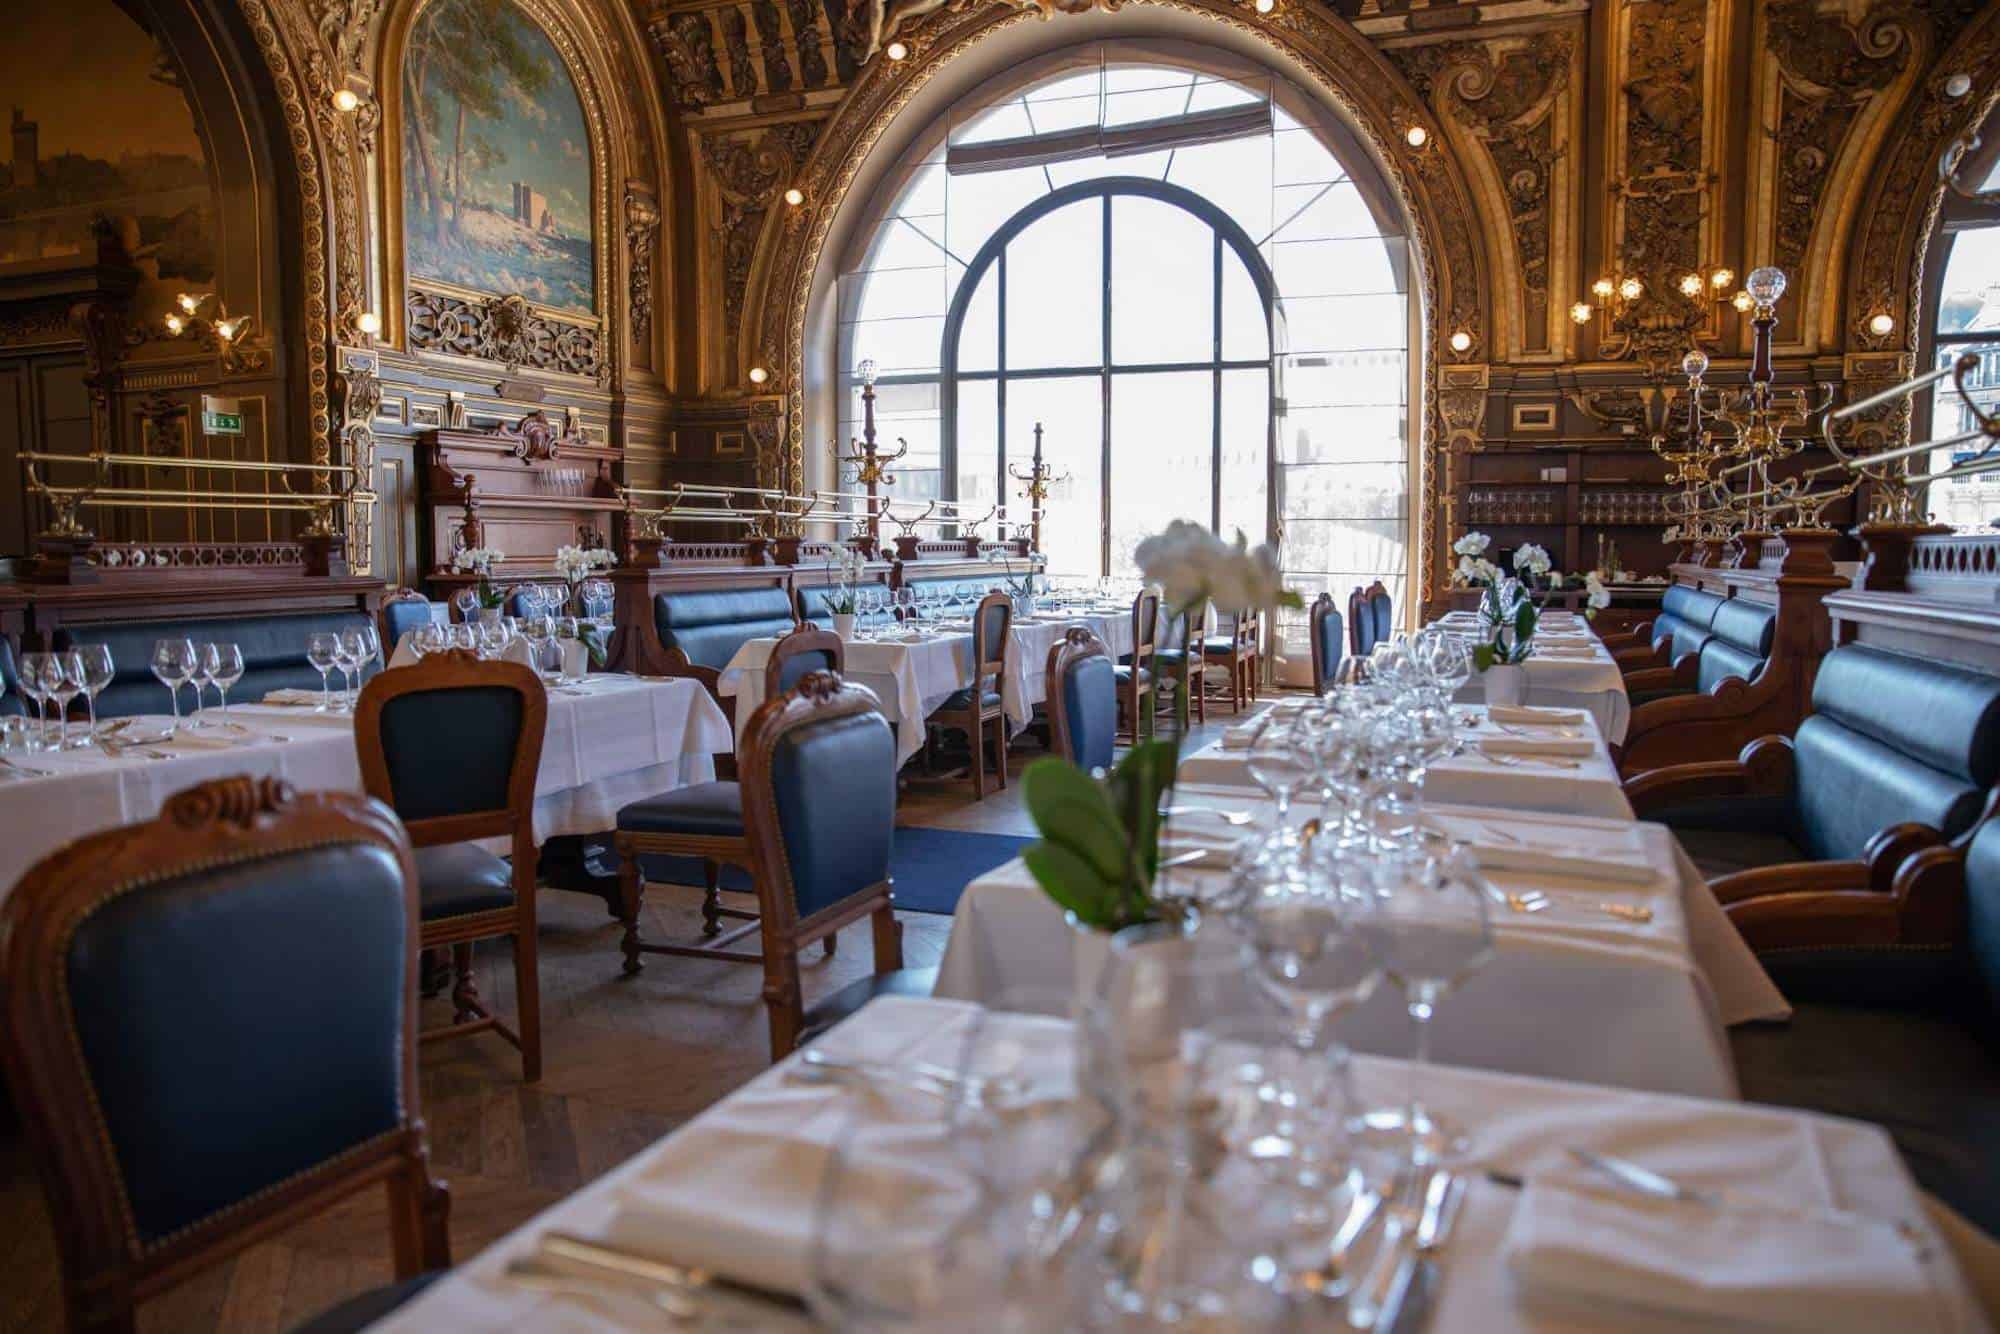 The opulent interior of the restaurant Le Train Bleu in Paris, tables covered in white tablecloths with white serviettes and wine glasses, blue upholstered seats, the walls have painted frescoes and carved gold detailing.